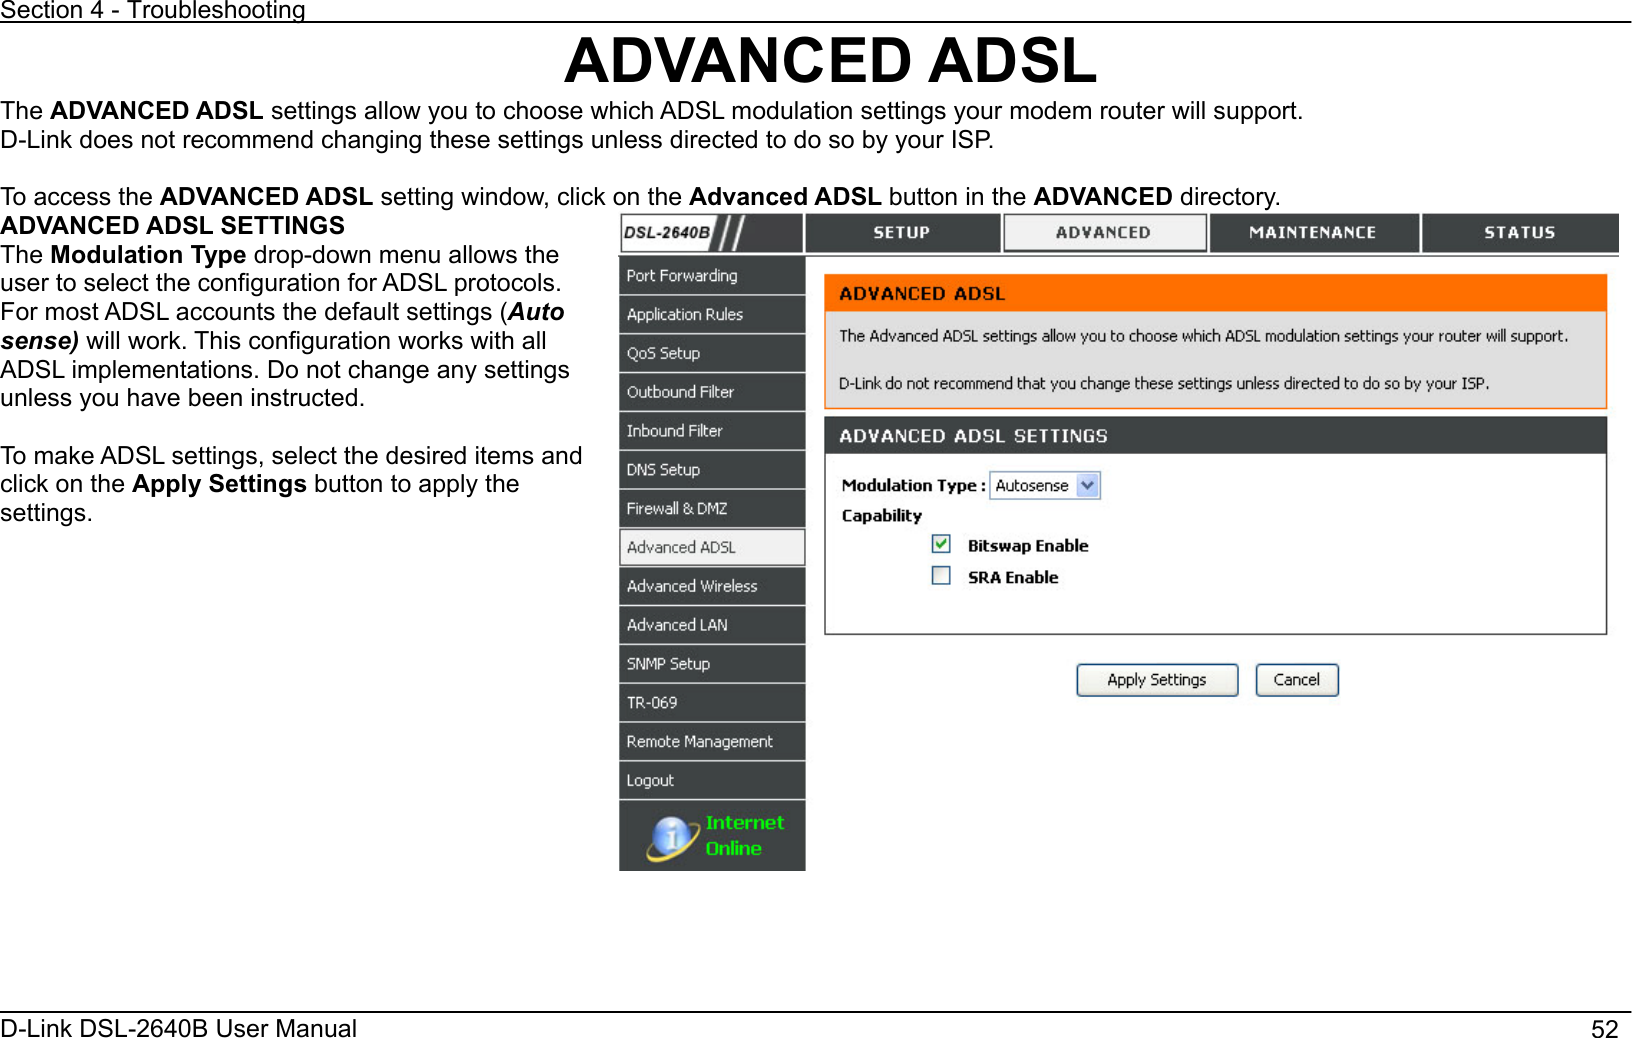 Section 4 - Troubleshooting D-Link DSL-2640B User Manual                                       52ADVANCED ADSL The ADVANCED ADSL settings allow you to choose which ADSL modulation settings your modem router will support. D-Link does not recommend changing these settings unless directed to do so by your ISP. To access the ADVANCED ADSL setting window, click on the Advanced ADSL button in the ADVANCED directory. ADVANCED ADSL SETTINGS The Modulation Type drop-down menu allows the user to select the configuration for ADSL protocols. For most ADSL accounts the default settings (Autosense) will work. This configuration works with all ADSL implementations. Do not change any settings unless you have been instructed.   To make ADSL settings, select the desired items and click on the Apply Settings button to apply the settings.